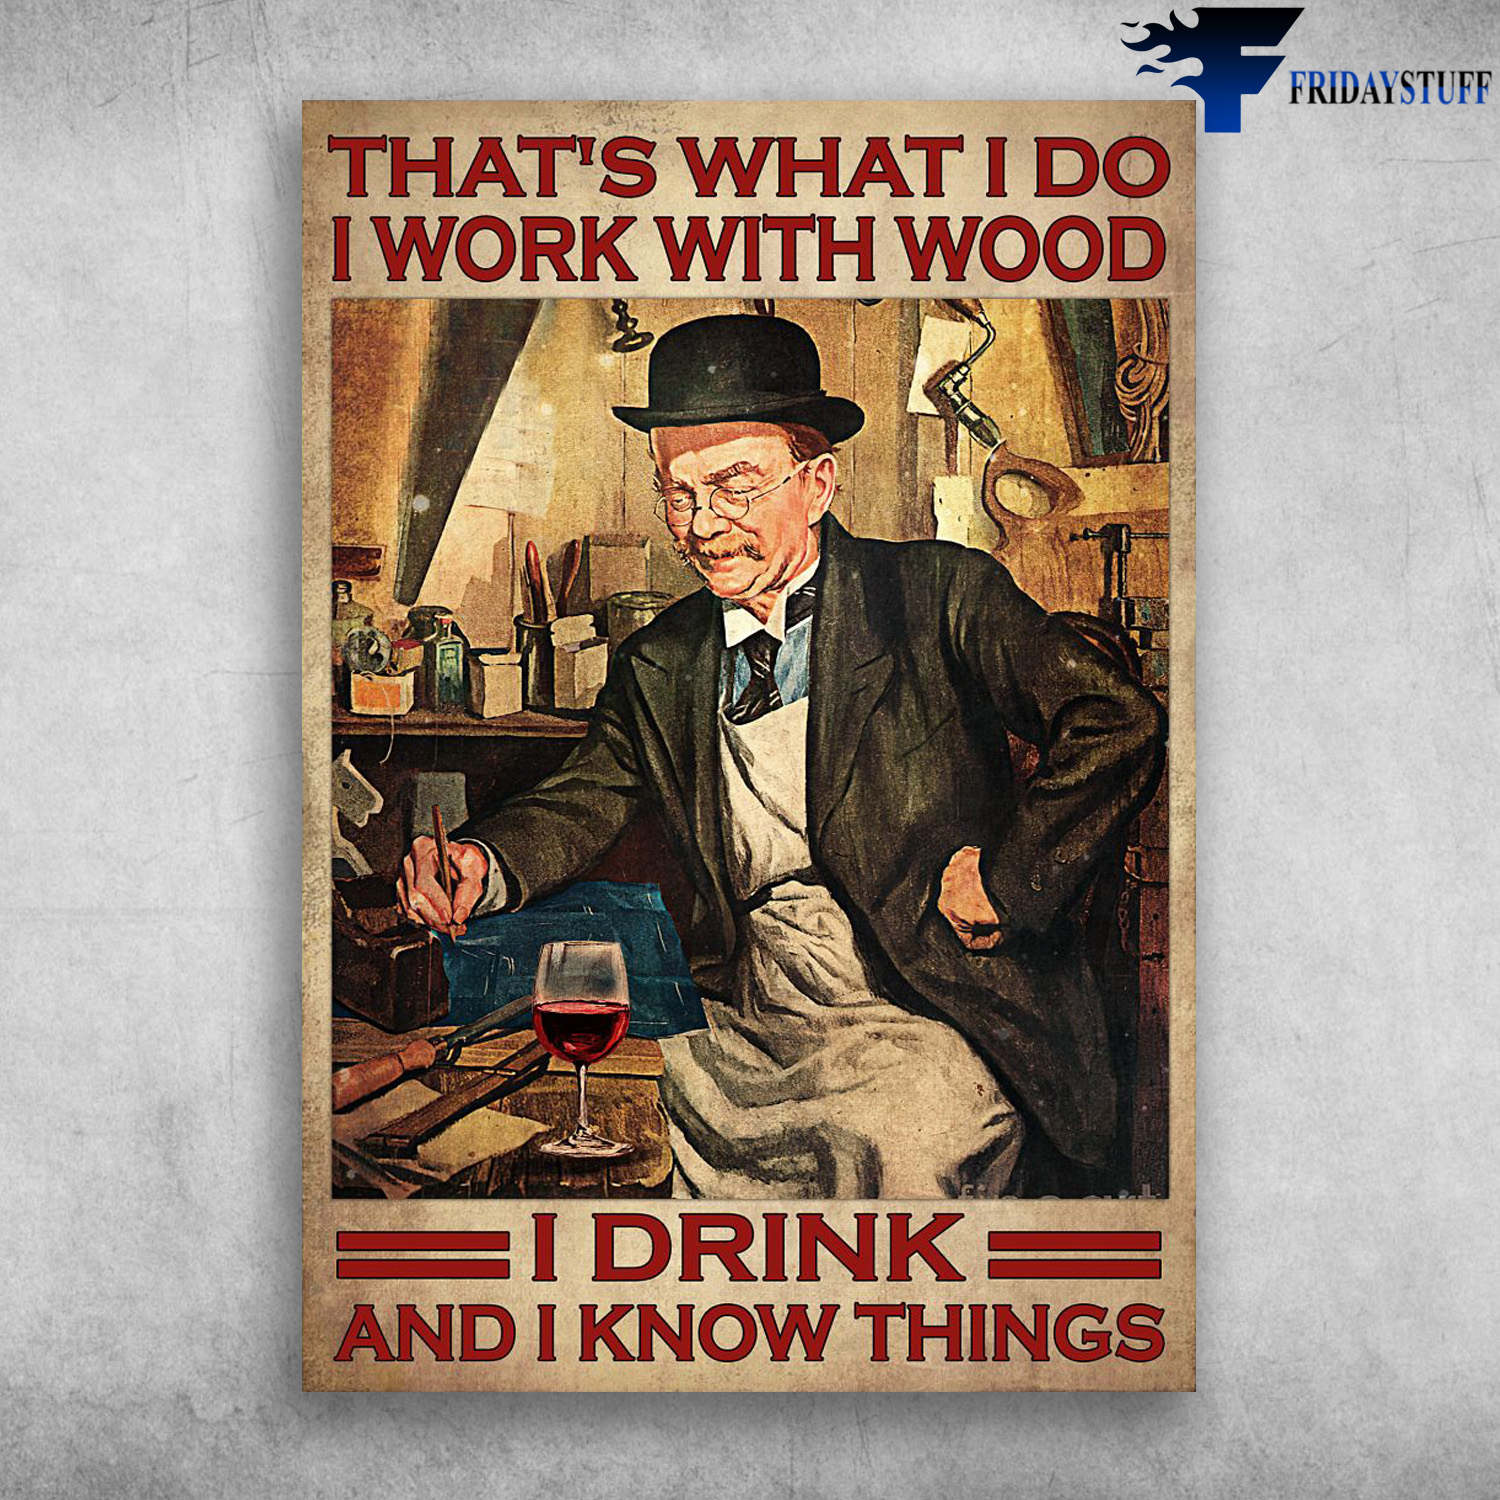 Old Carpenter, Old Man Drinks Wine - That's What I Do, I Work With Wood, I Drink, And I Know Things